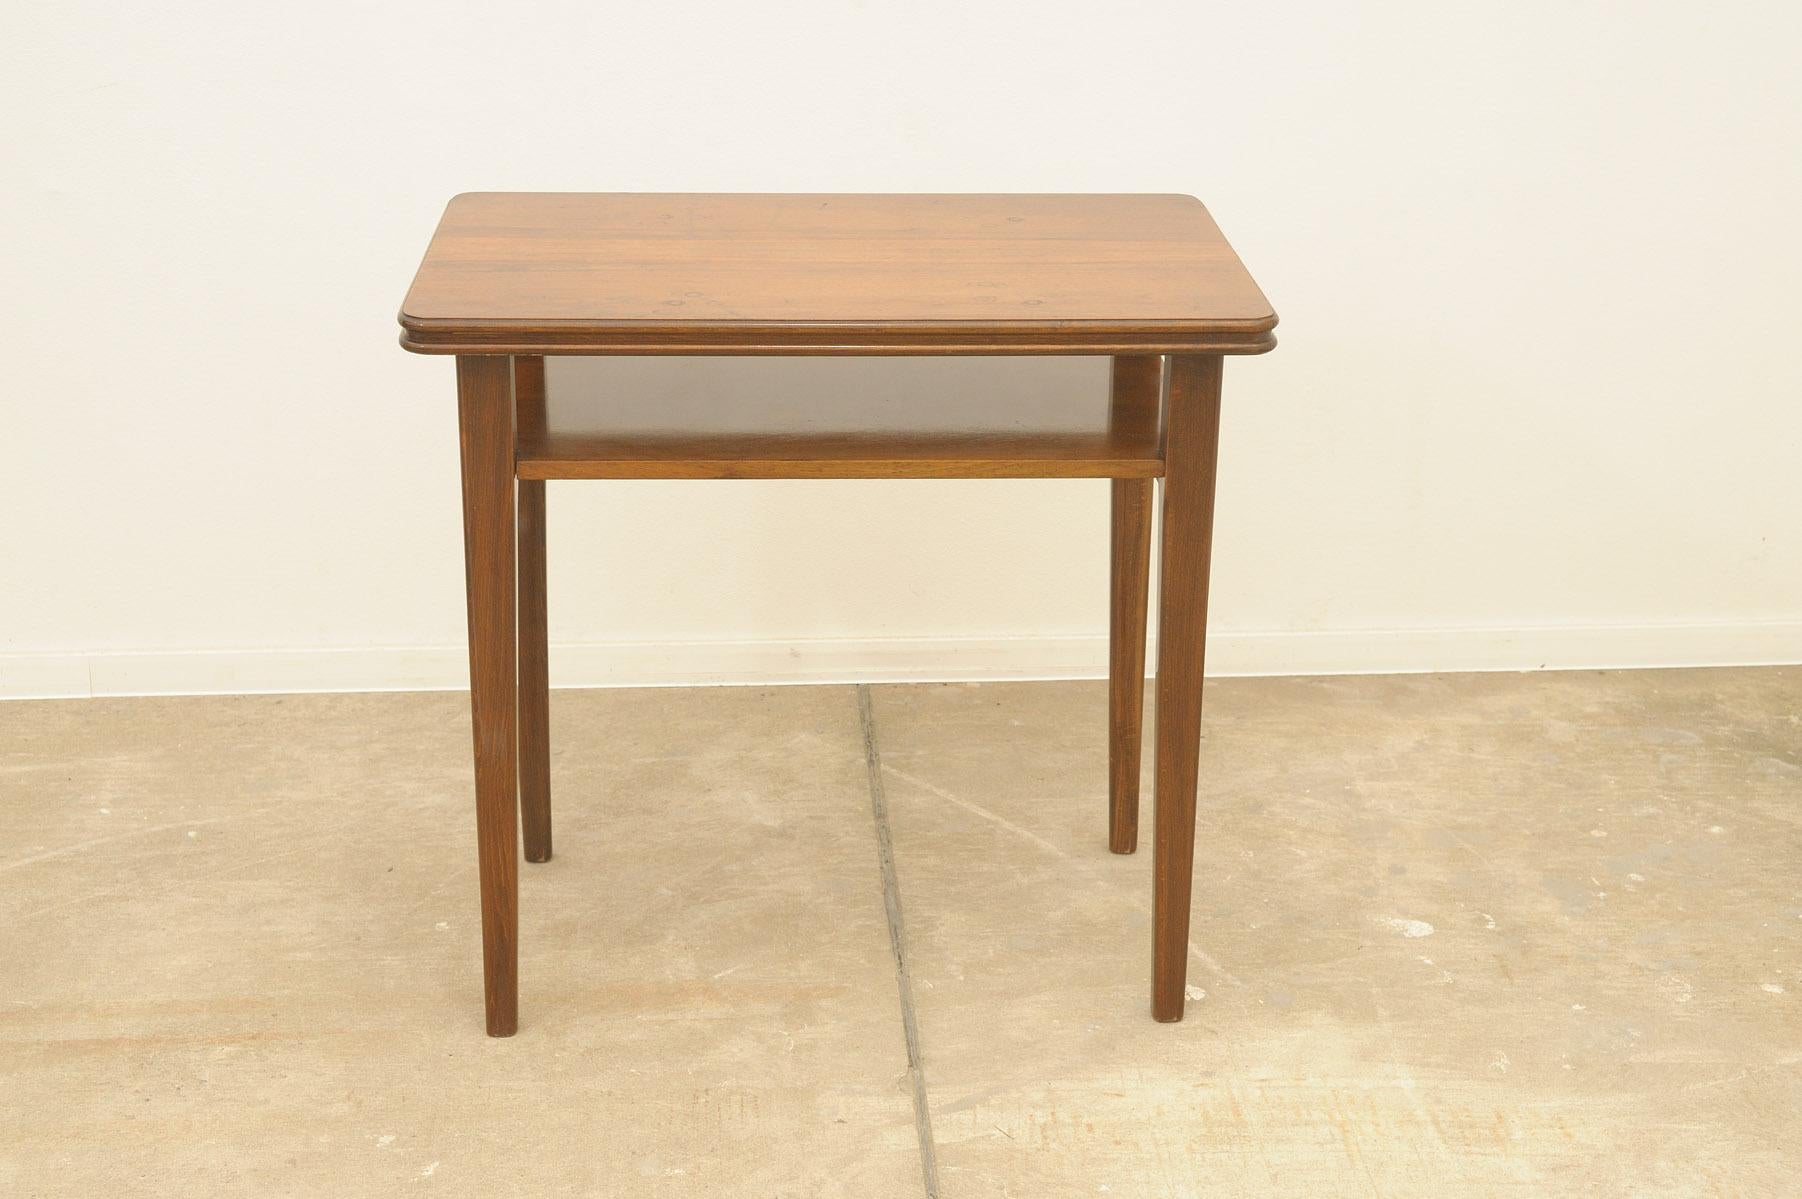 Mid century coffee table, made in the former Czechoslovakia in the 1950´s.
It´s made of walnut wood.
In good Vintage condition, showing signs of age and using.

Height: 80 cm

Lenght: 84 cm

Depth: 55 cm